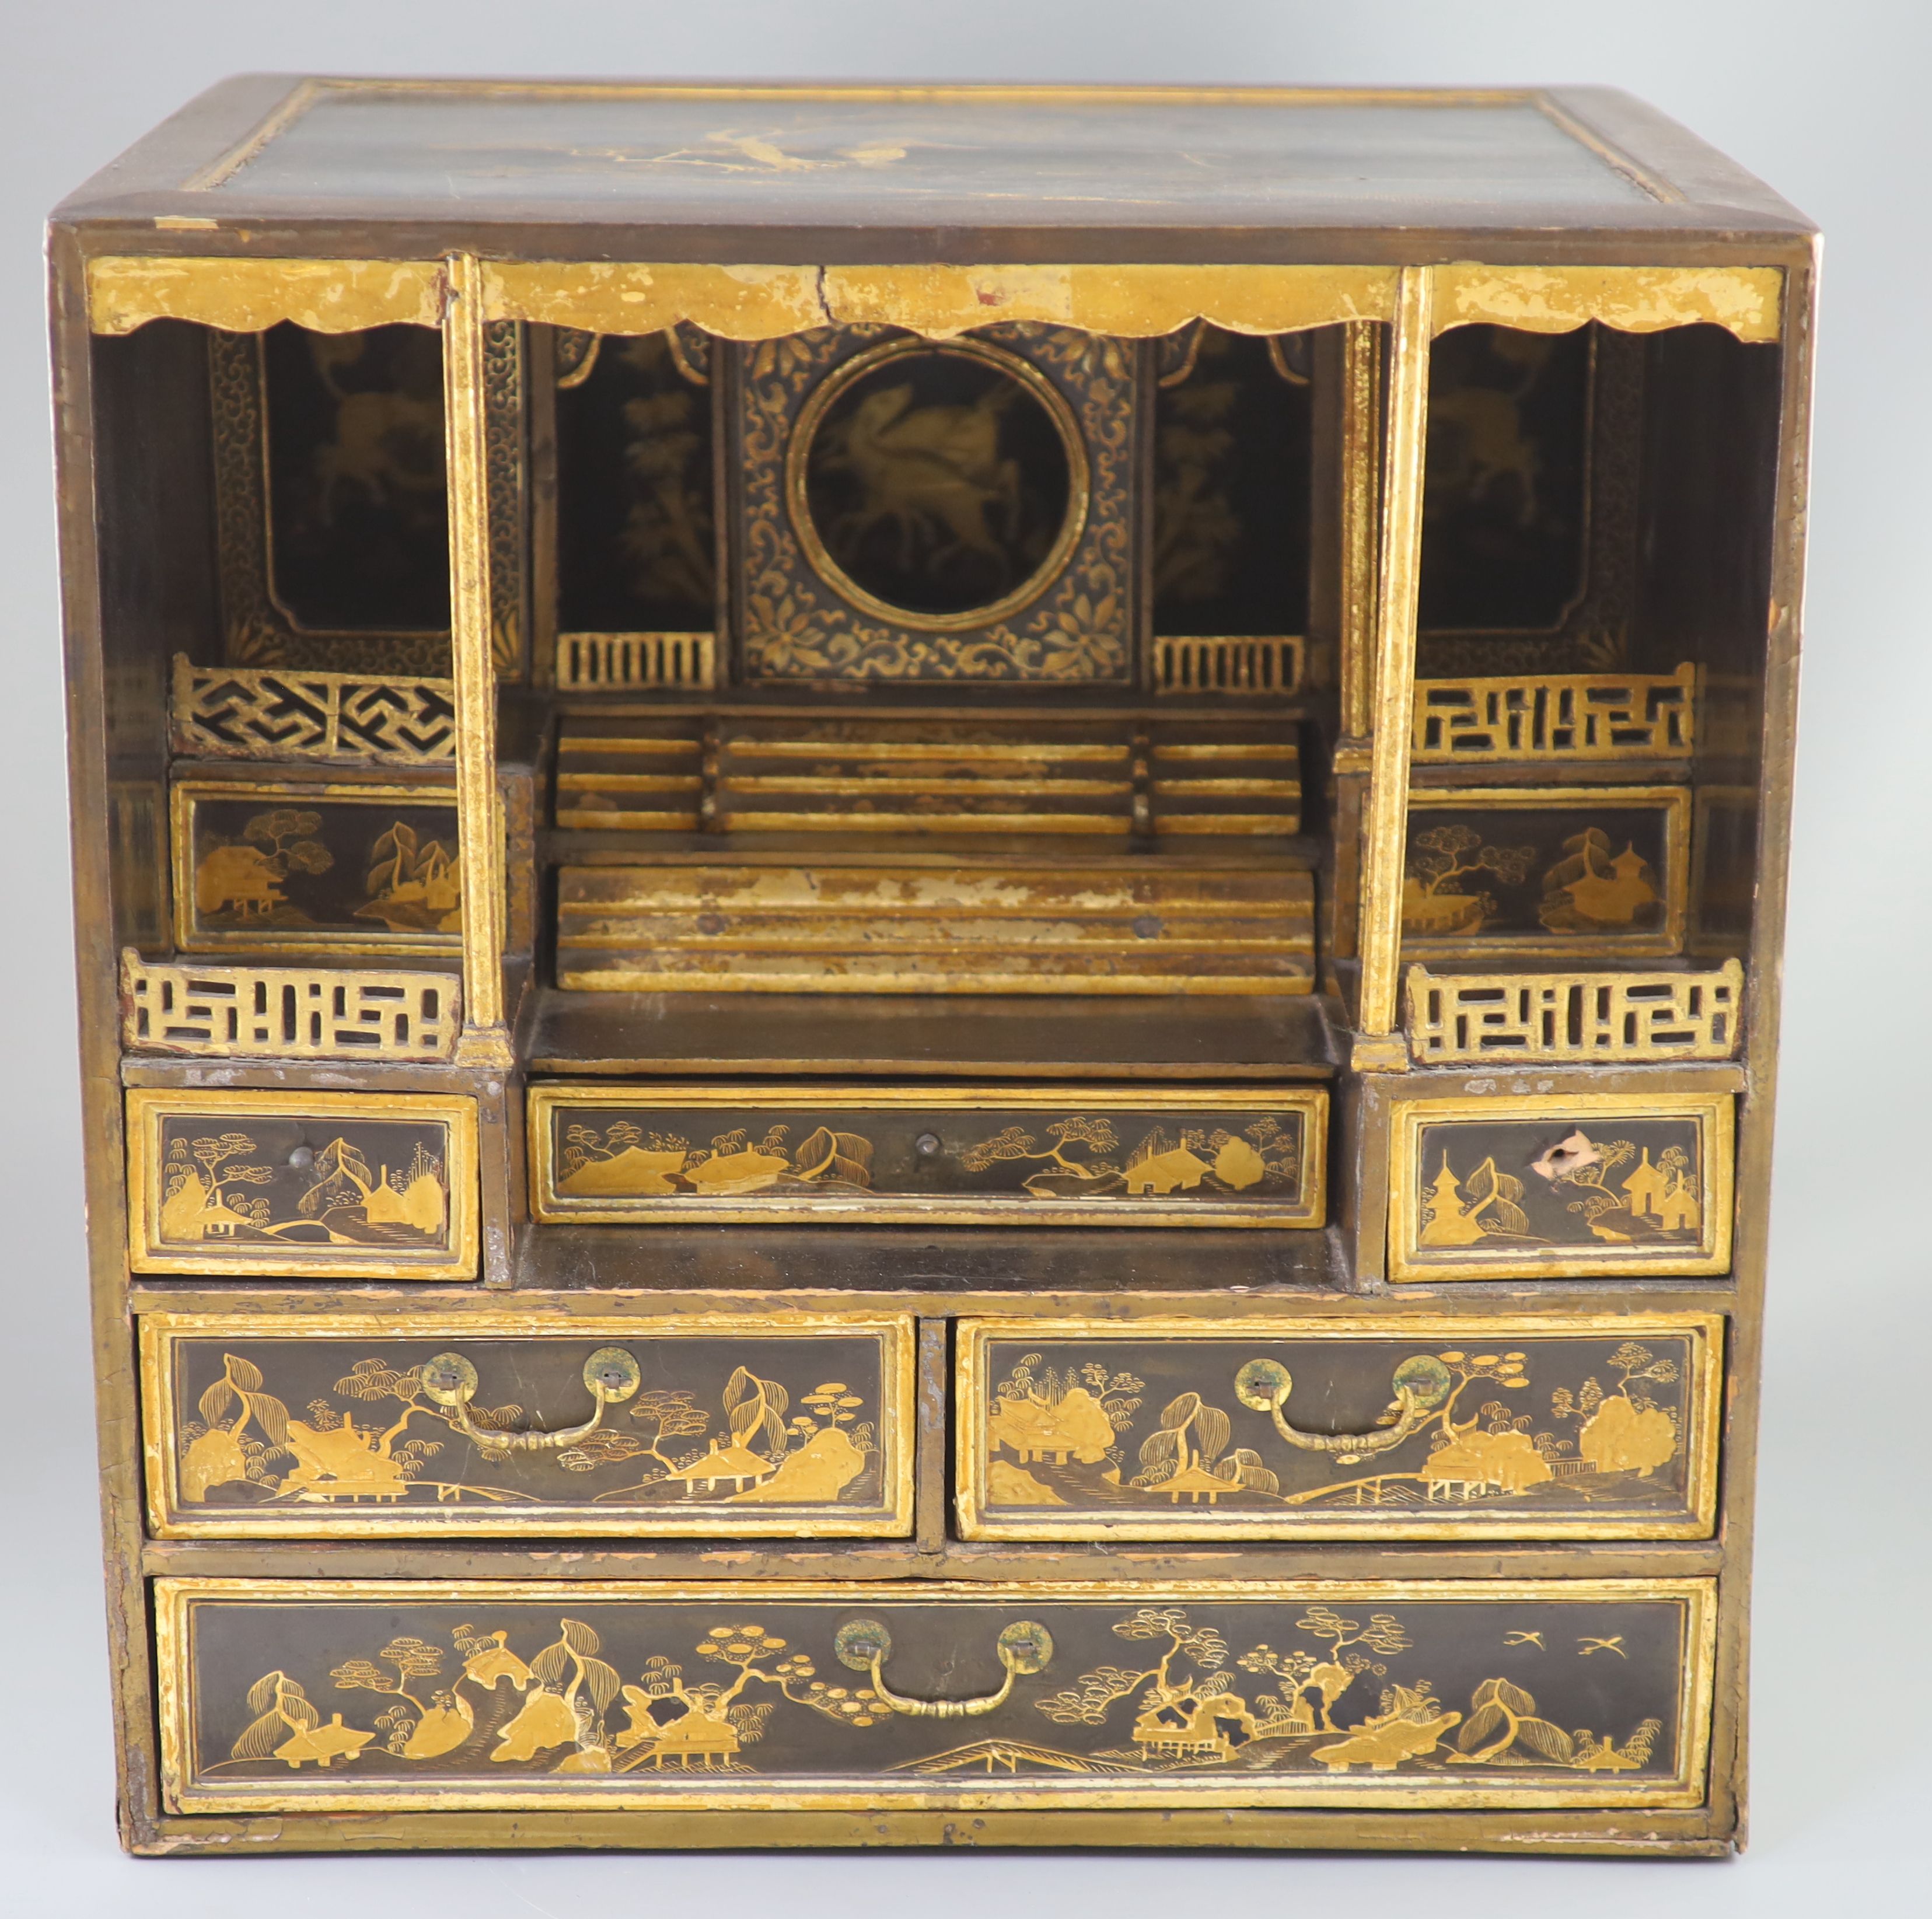 A Japanese gilt decorated black lacquer shrine cabinet, 19th century, 46cm high, 46cm wide, 38cm deep, Provenance - A. T. Arber-Cooke